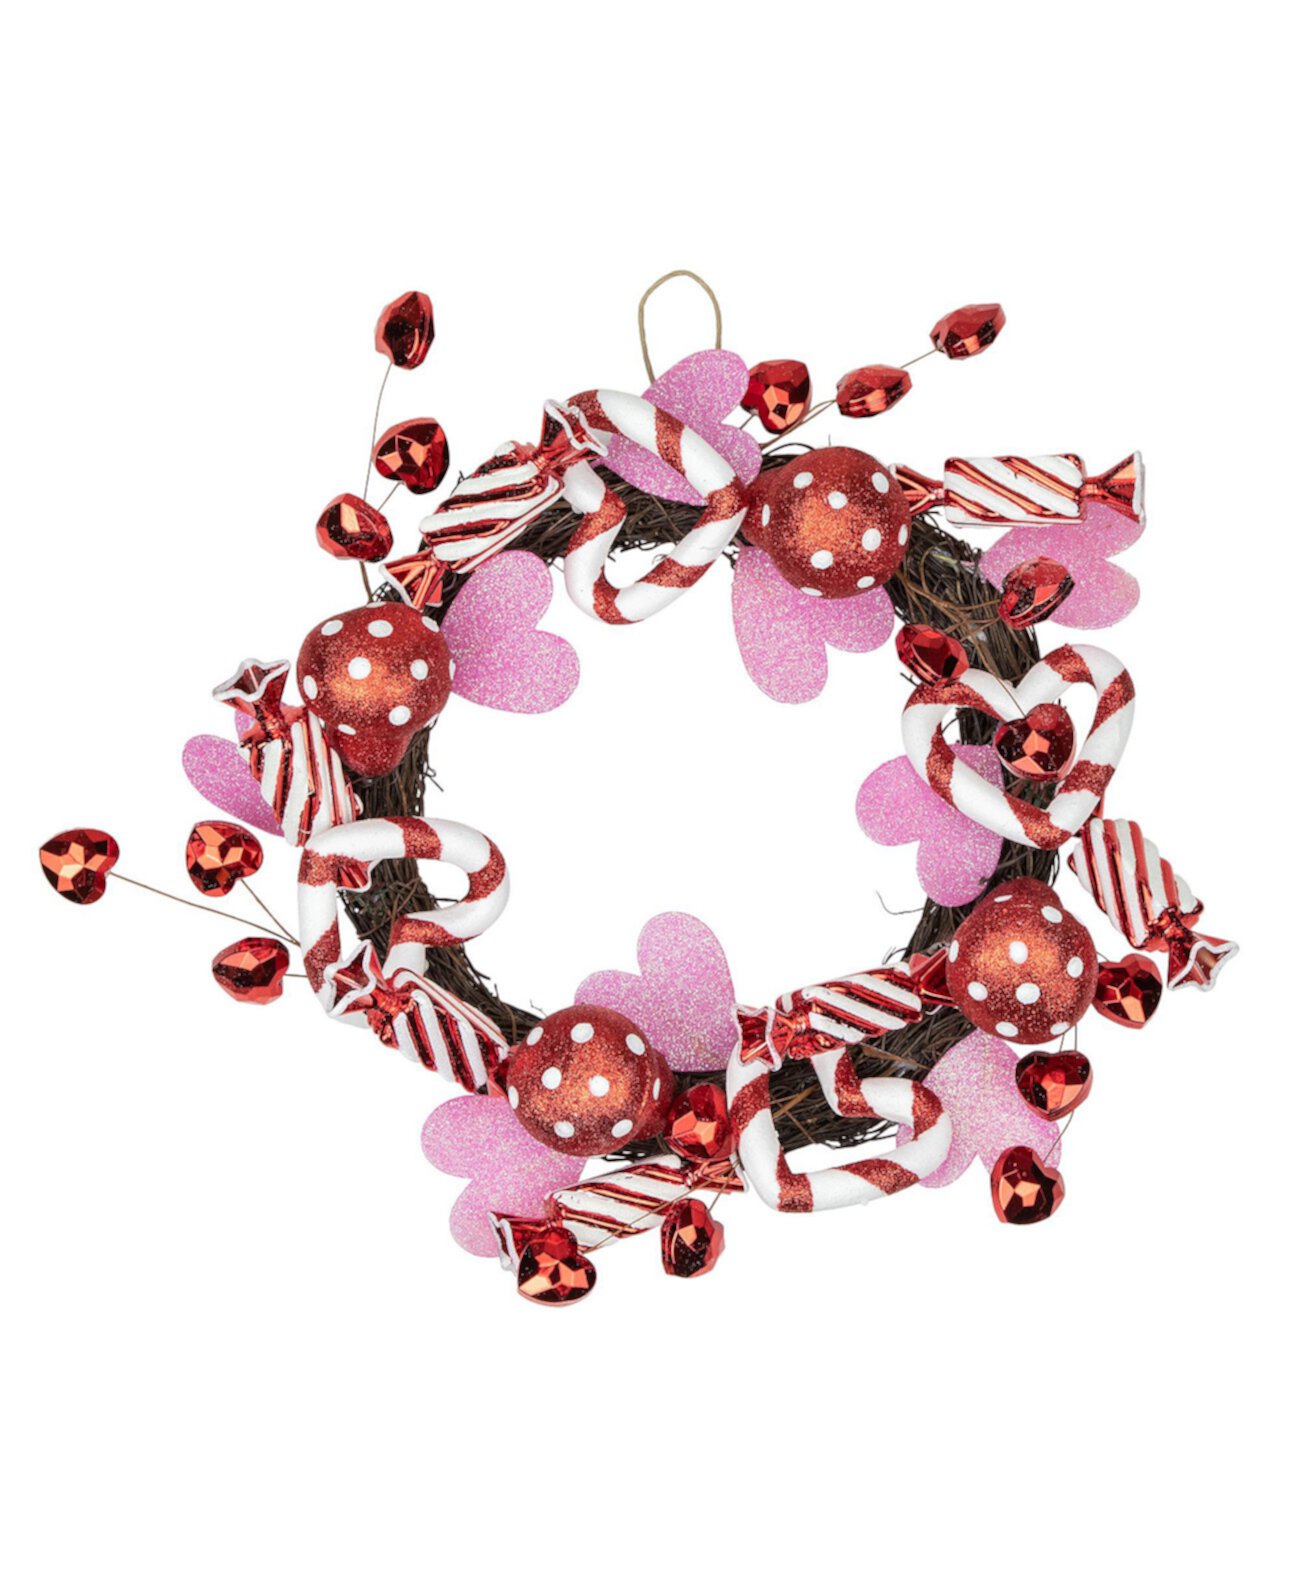 Candies and Hearts Valentine's Day Wreath Unlit, 16" Northlight